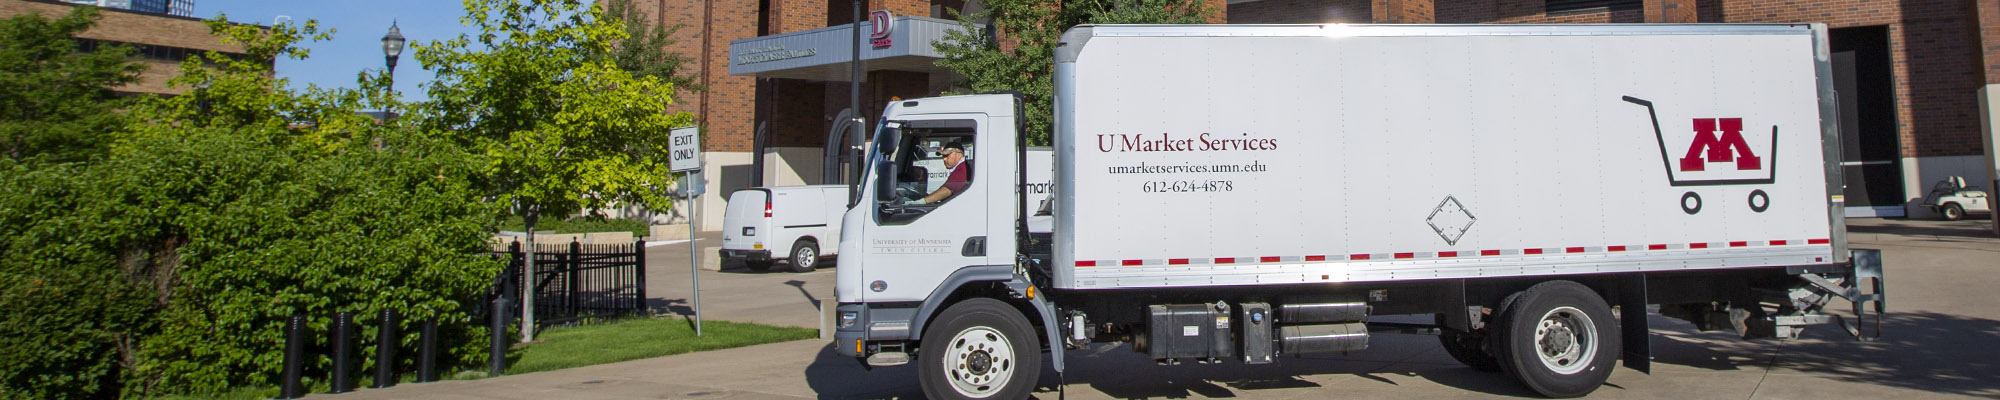 U Market truck parked in front of the UMN stadium